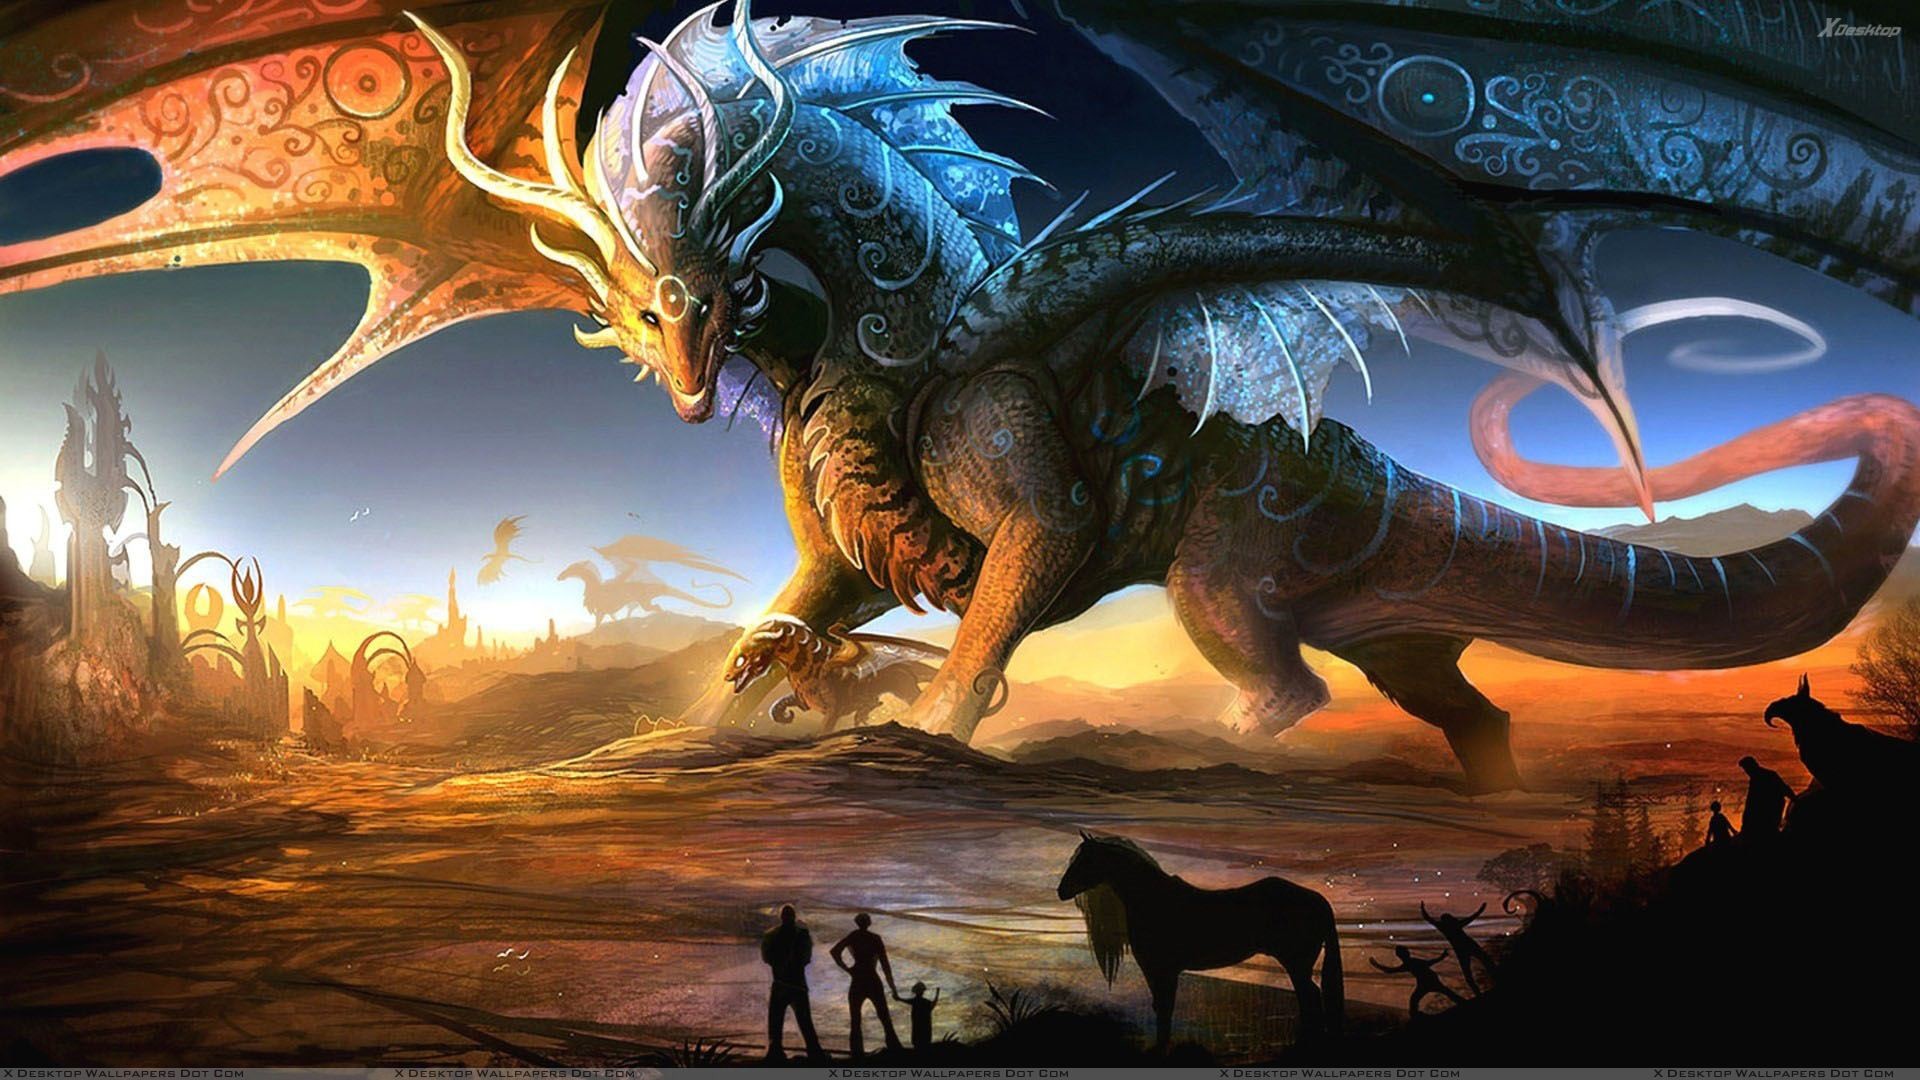 1920x1080 You are viewing wallpaper titled "Dragon Fantasy Art" ...